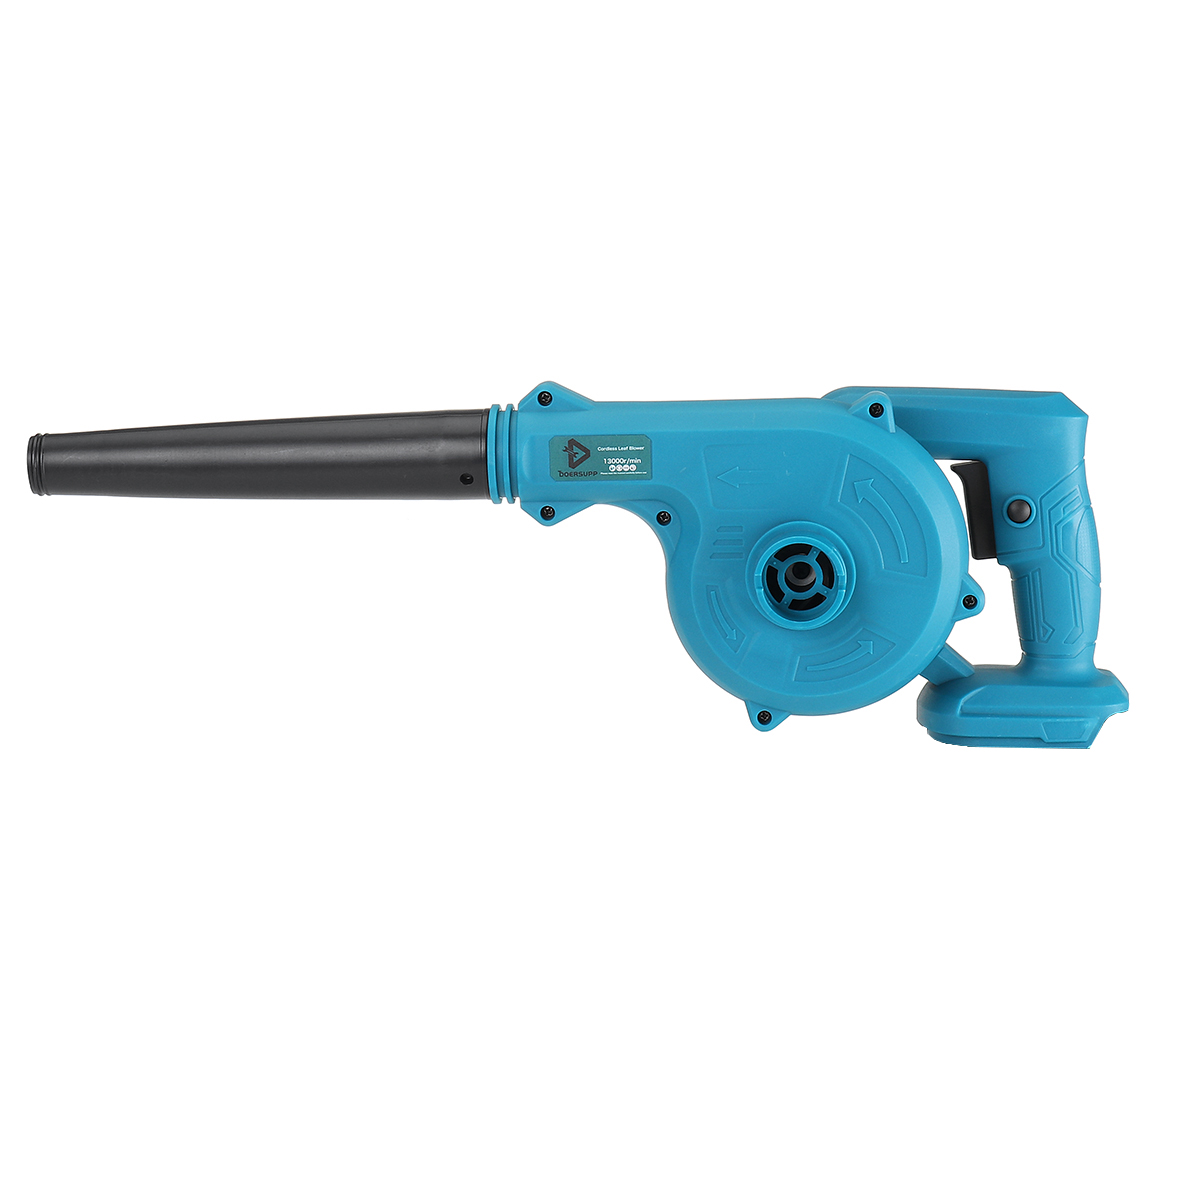 1800W-Electric-Blower-Cordless-Vacuum-Handhled-Cleaning-Tools-Dust-Blowing-Dust-Collector-Power-Tool-1912149-10